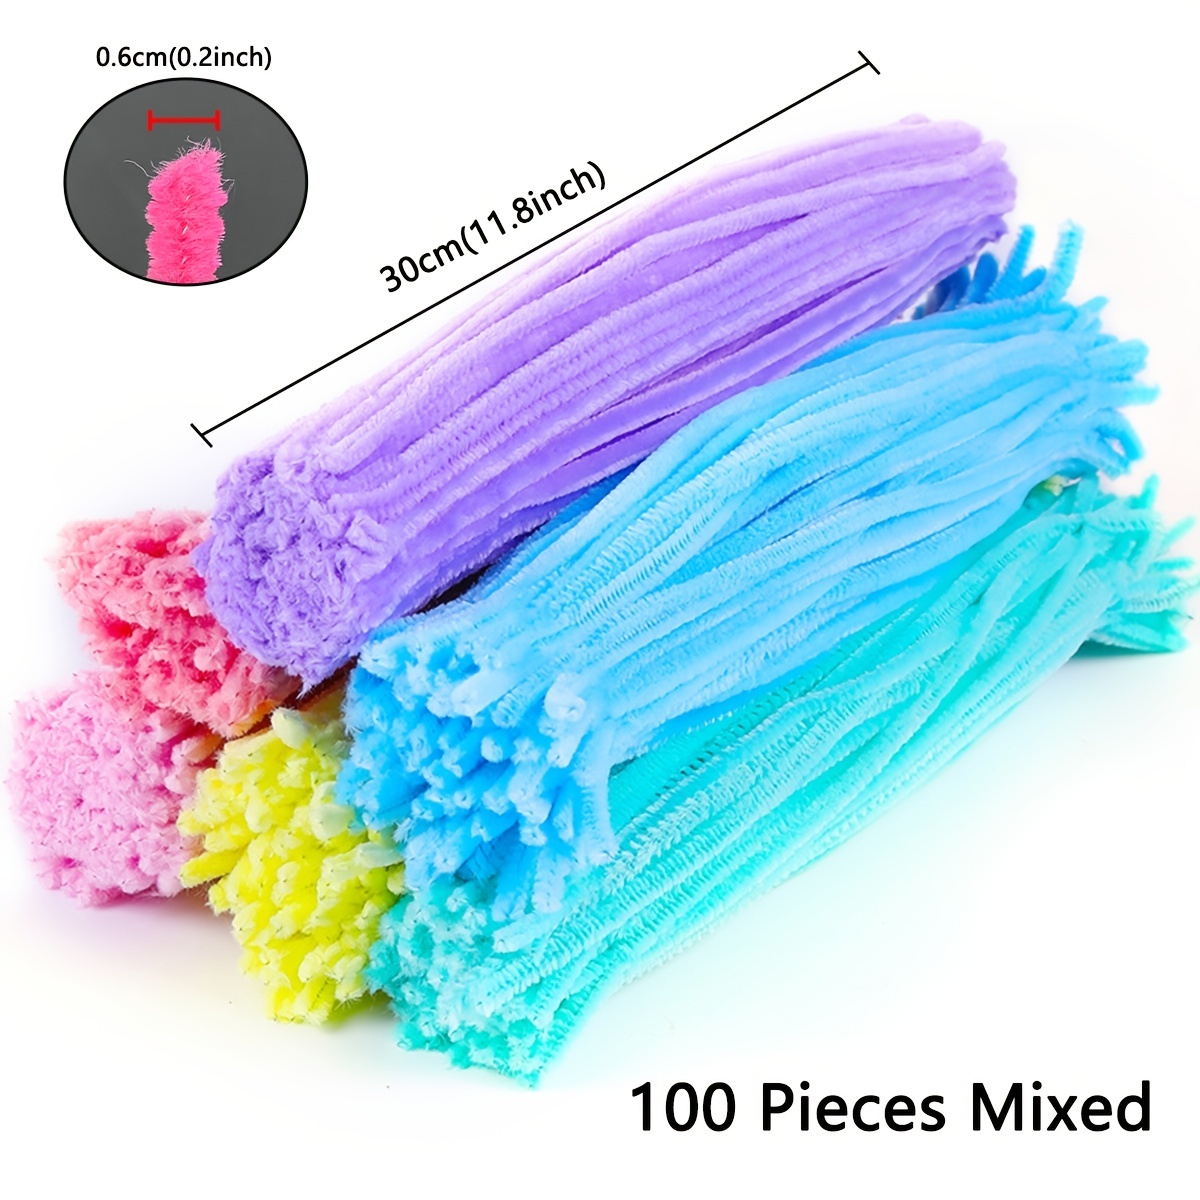 150 Purple Pipe Cleaners Craft Chenille Stems – BLUE SQUID USA